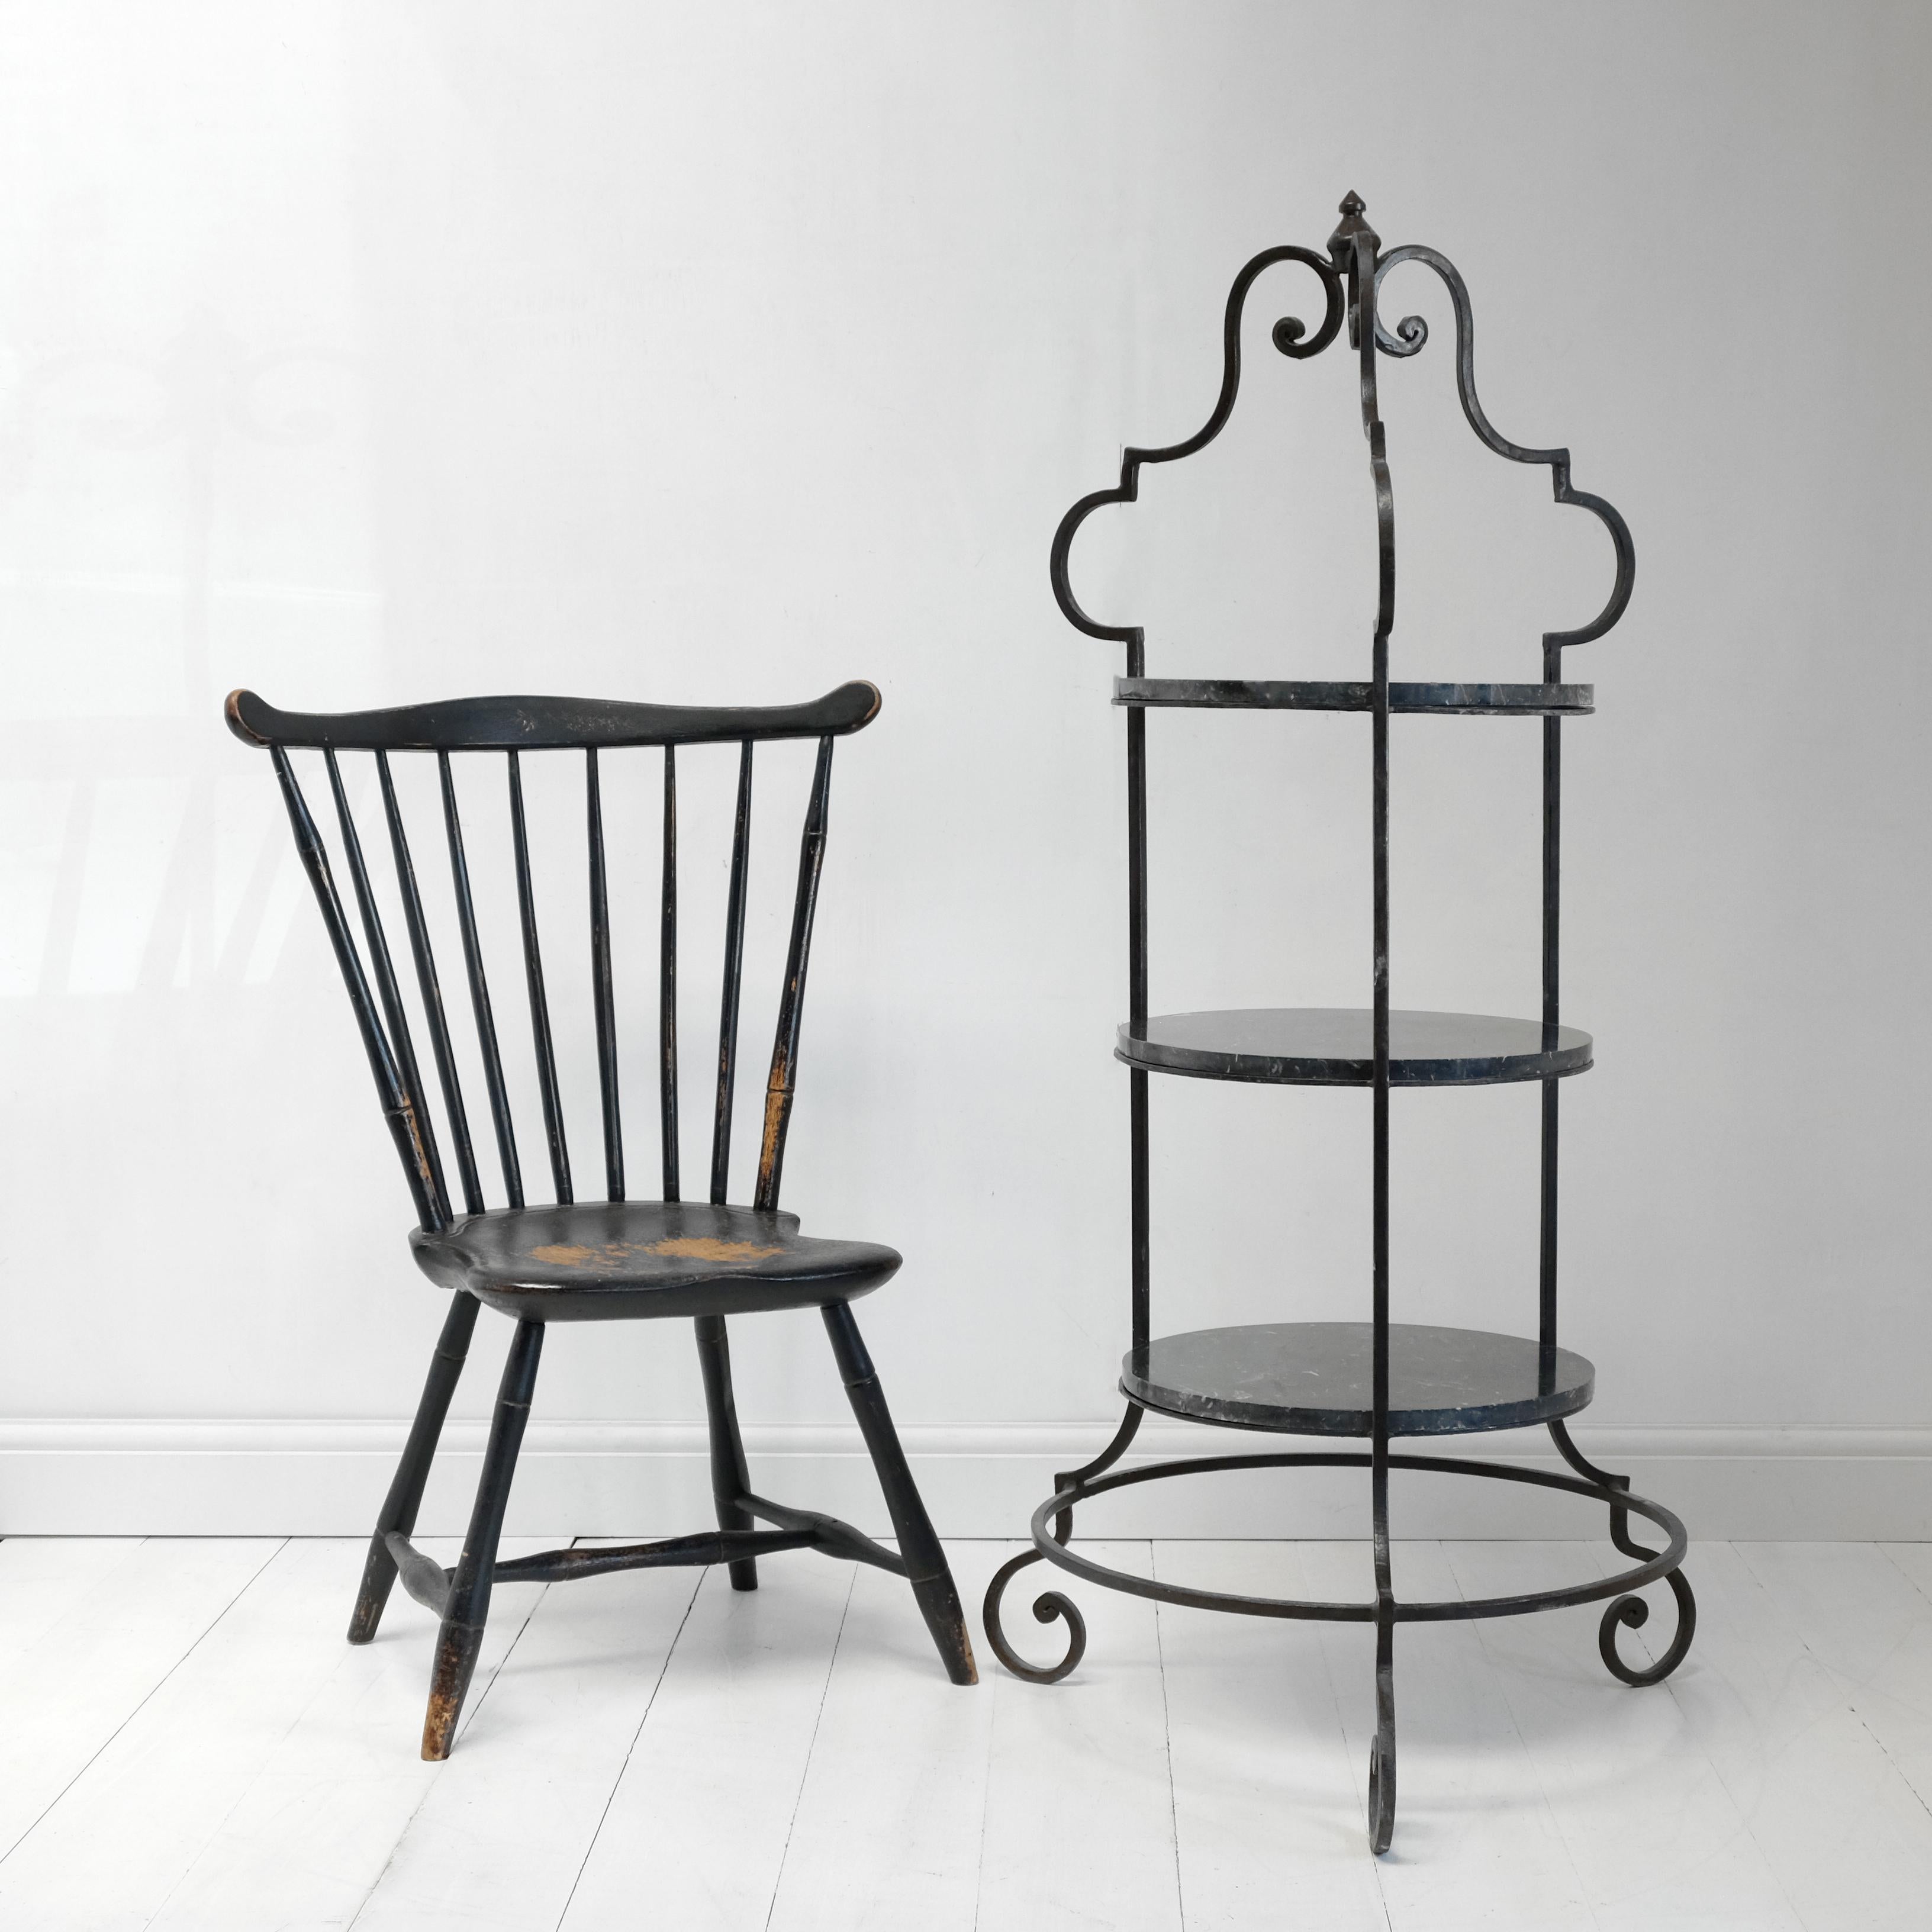 20th Century Large Wrought Iron Marble Pâtisserie Stand Ornate Floor Standing French Outdoor For Sale